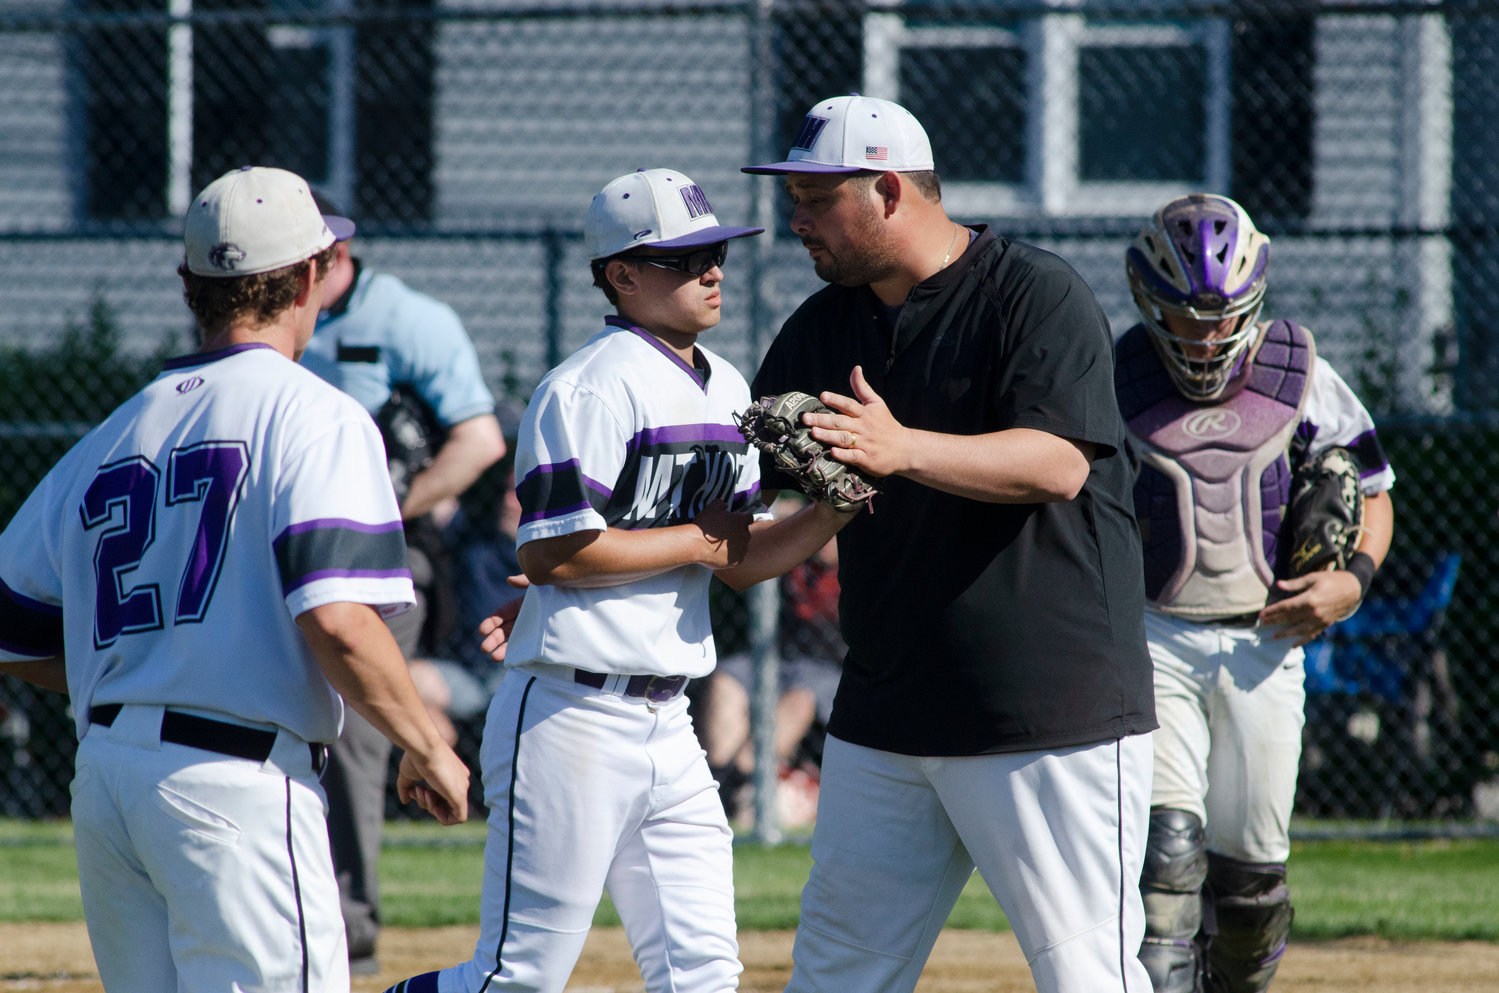 Huskies head coach celebrates with pitcher Ethan Leary after a strike out to end the third inning.